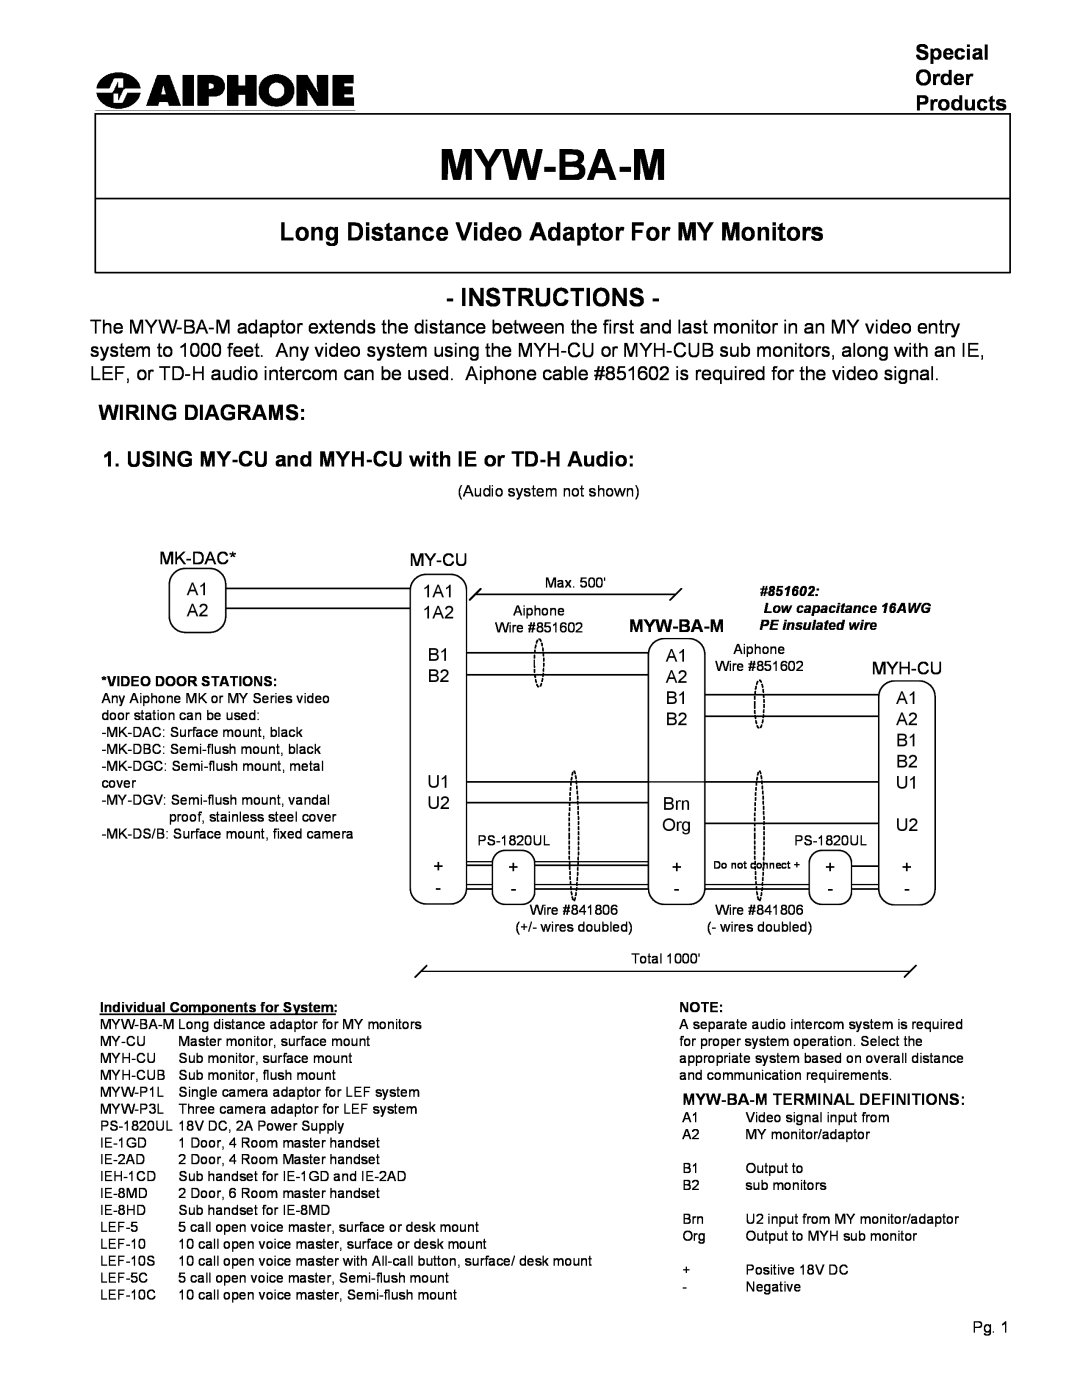 Aiphone MYW-BA-M manual Special Order Products, WIRING DIAGRAMS 1. USING MY-CU and MYH-CU with IE or TD-H Audio, Myw-Ba-M 